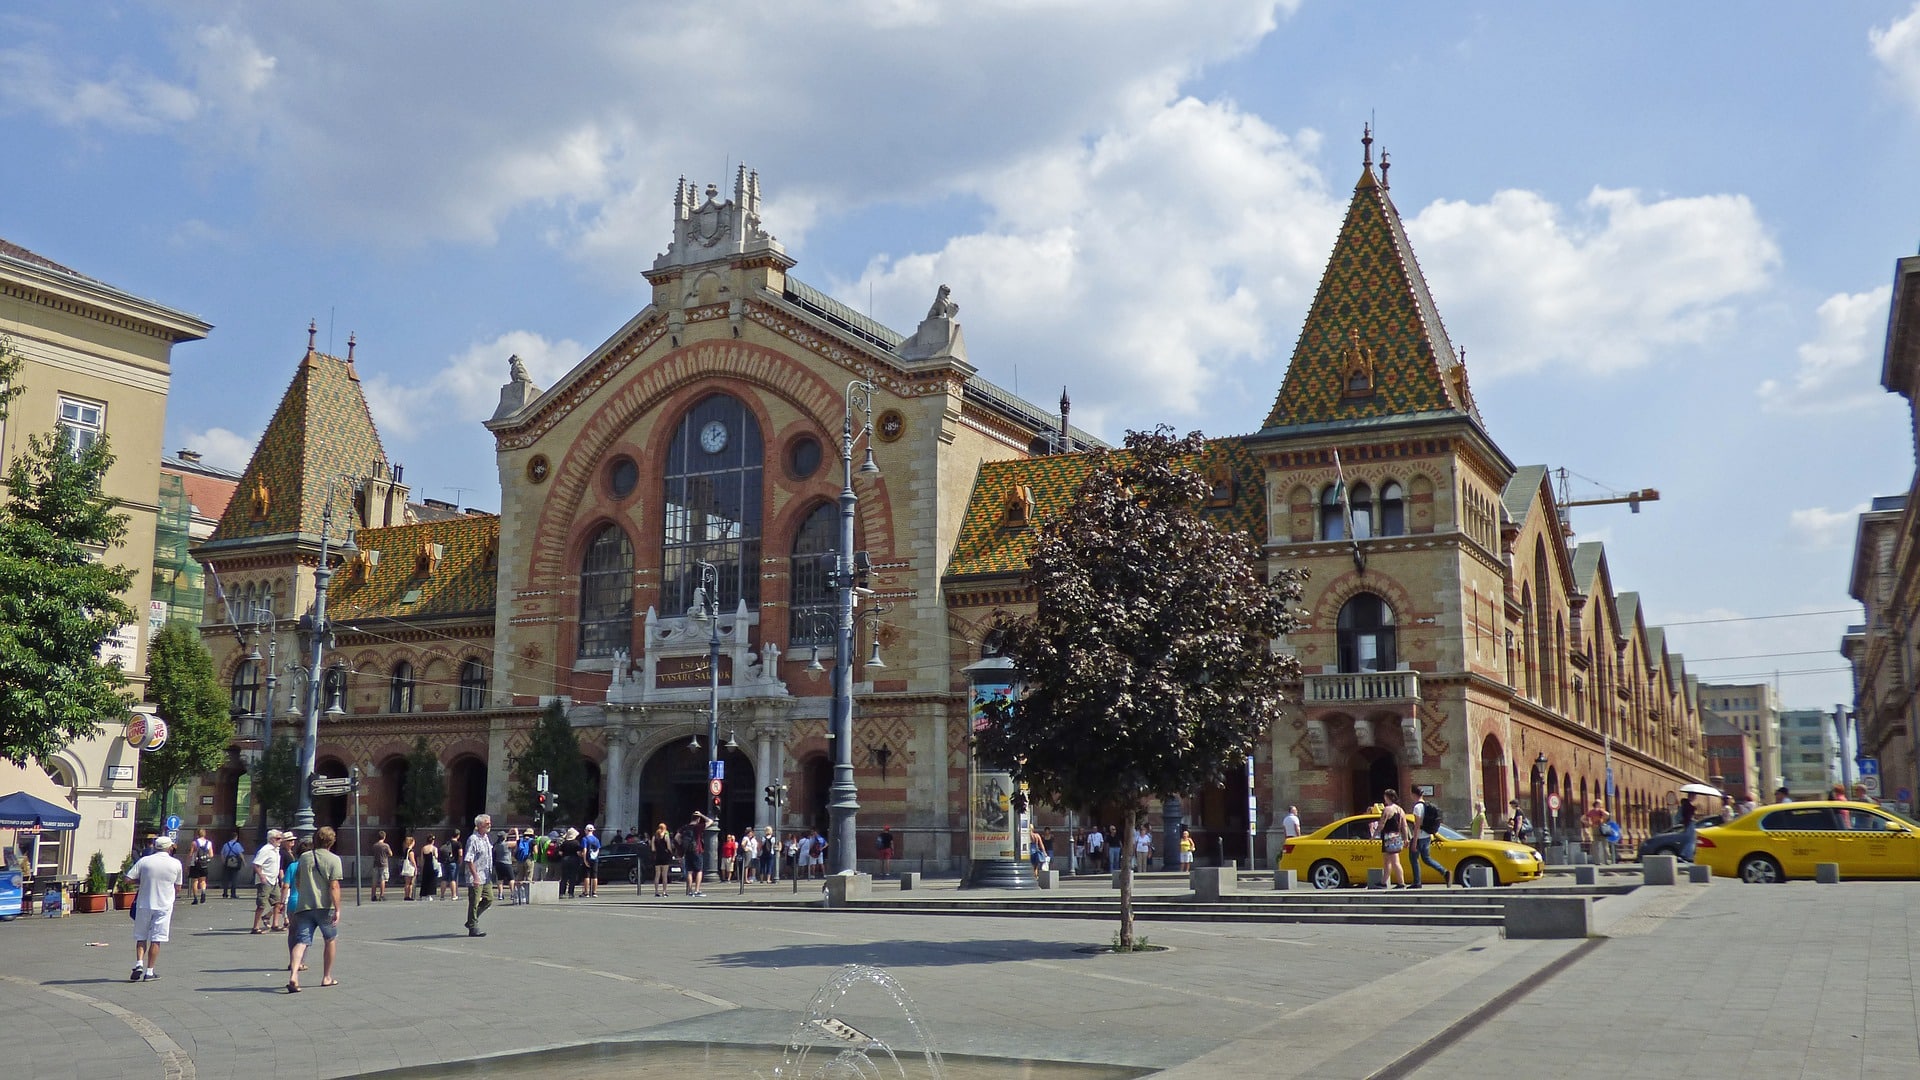 The Great Market Hall